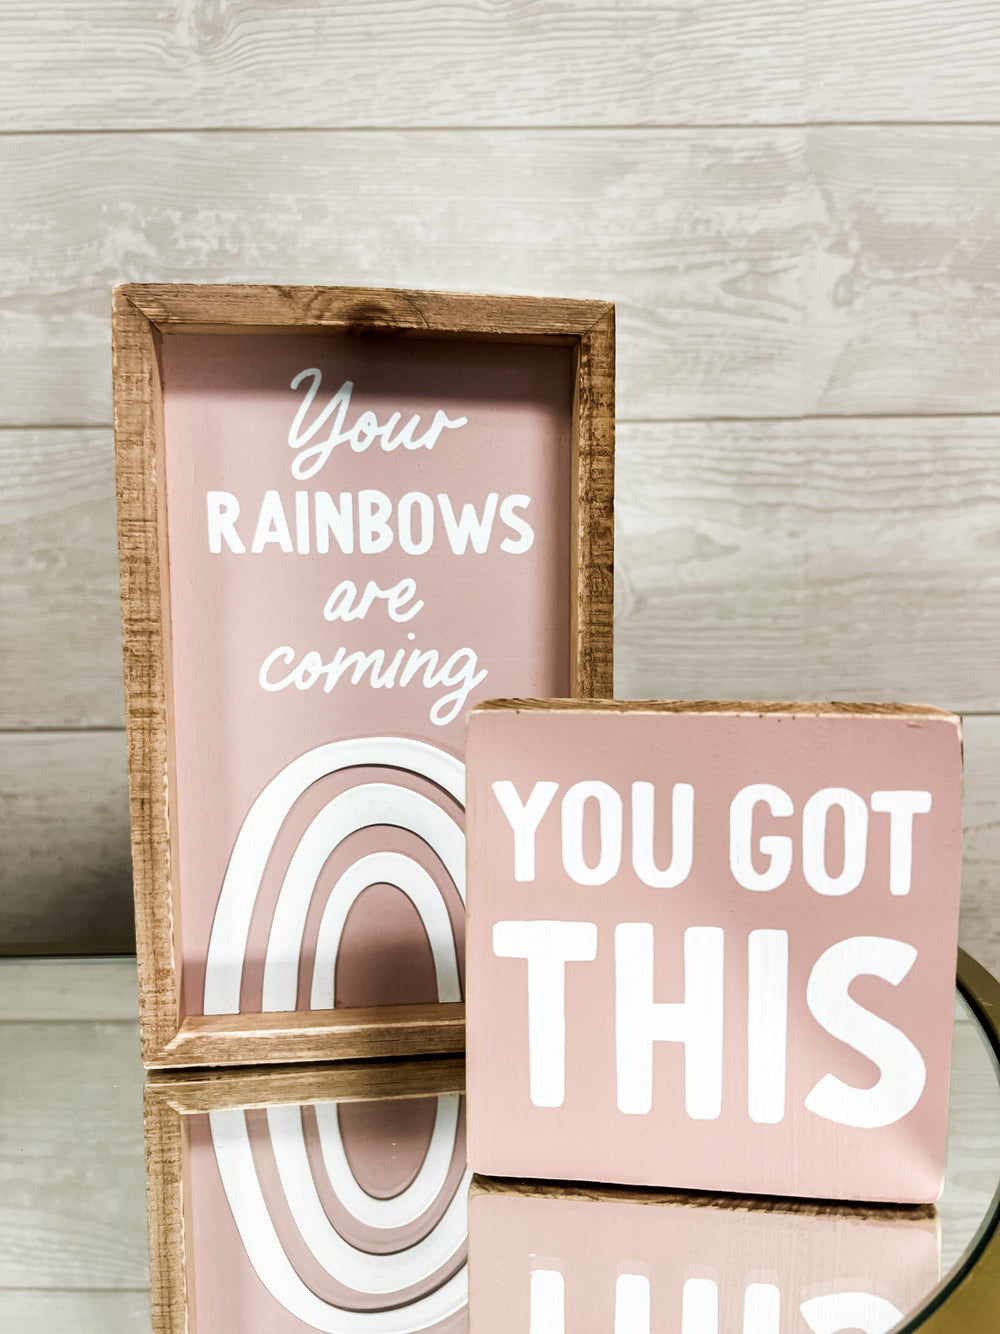 Rainbows Are Coming - The Teal Antler Boutique